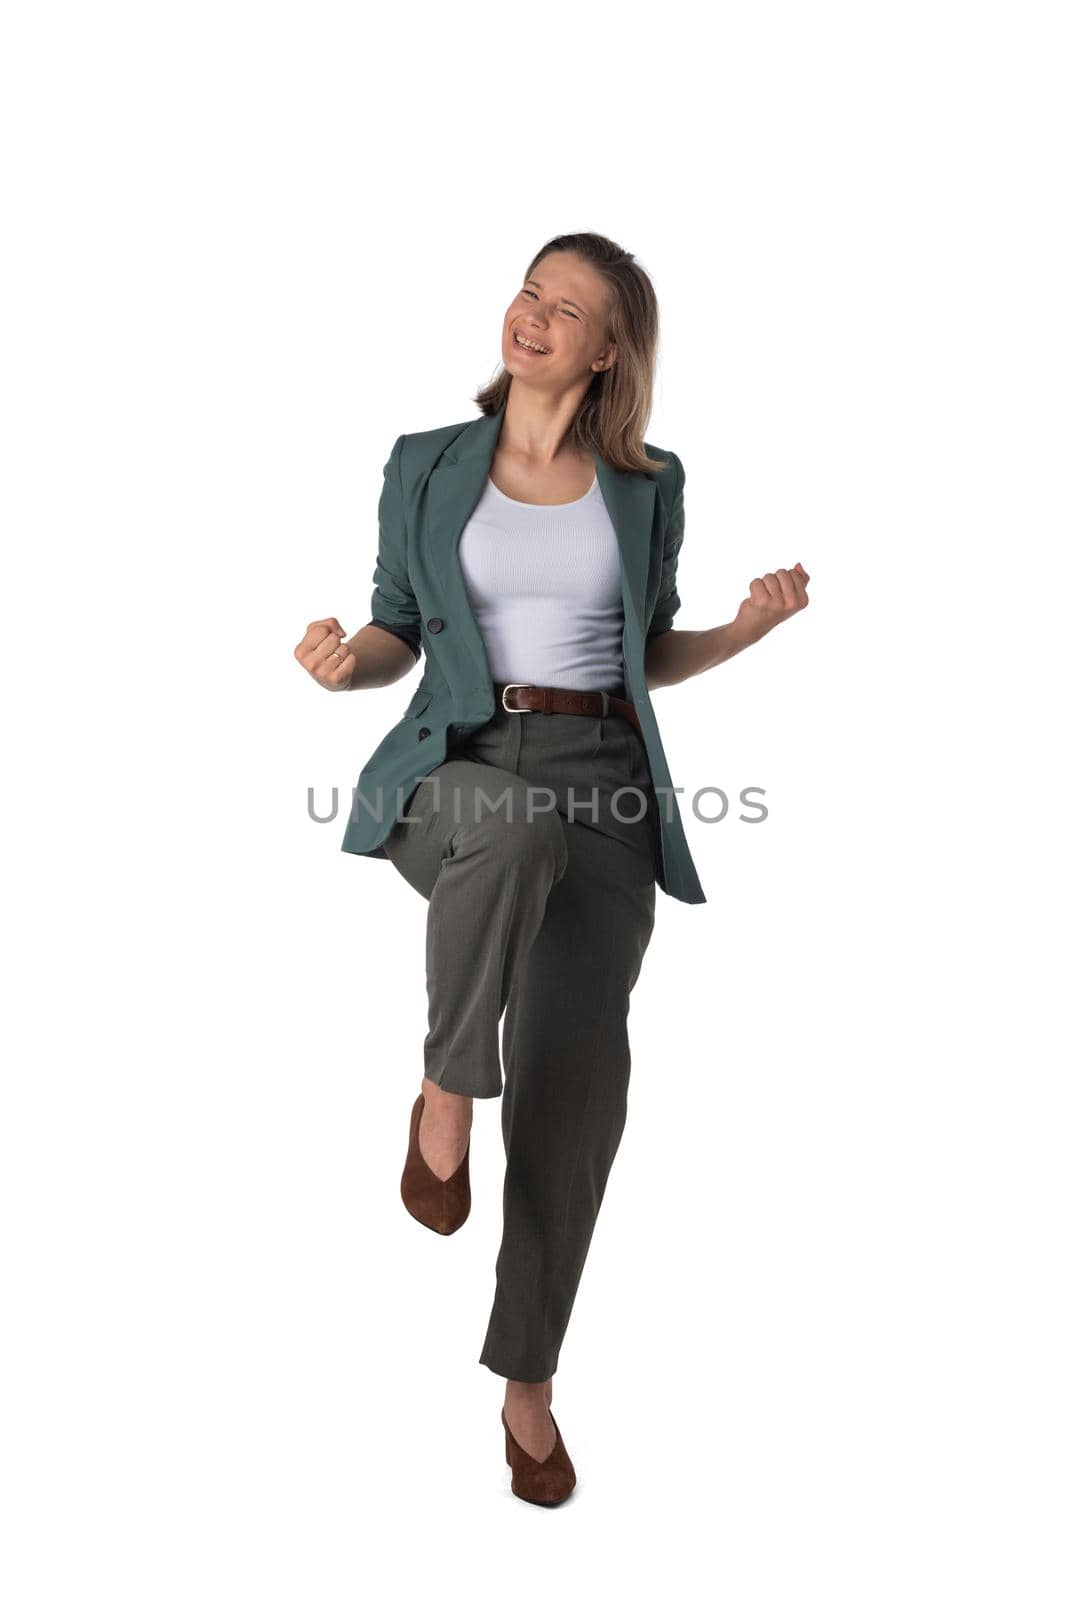 Young business woman winner holding fists isolated on white background full length studio portrait